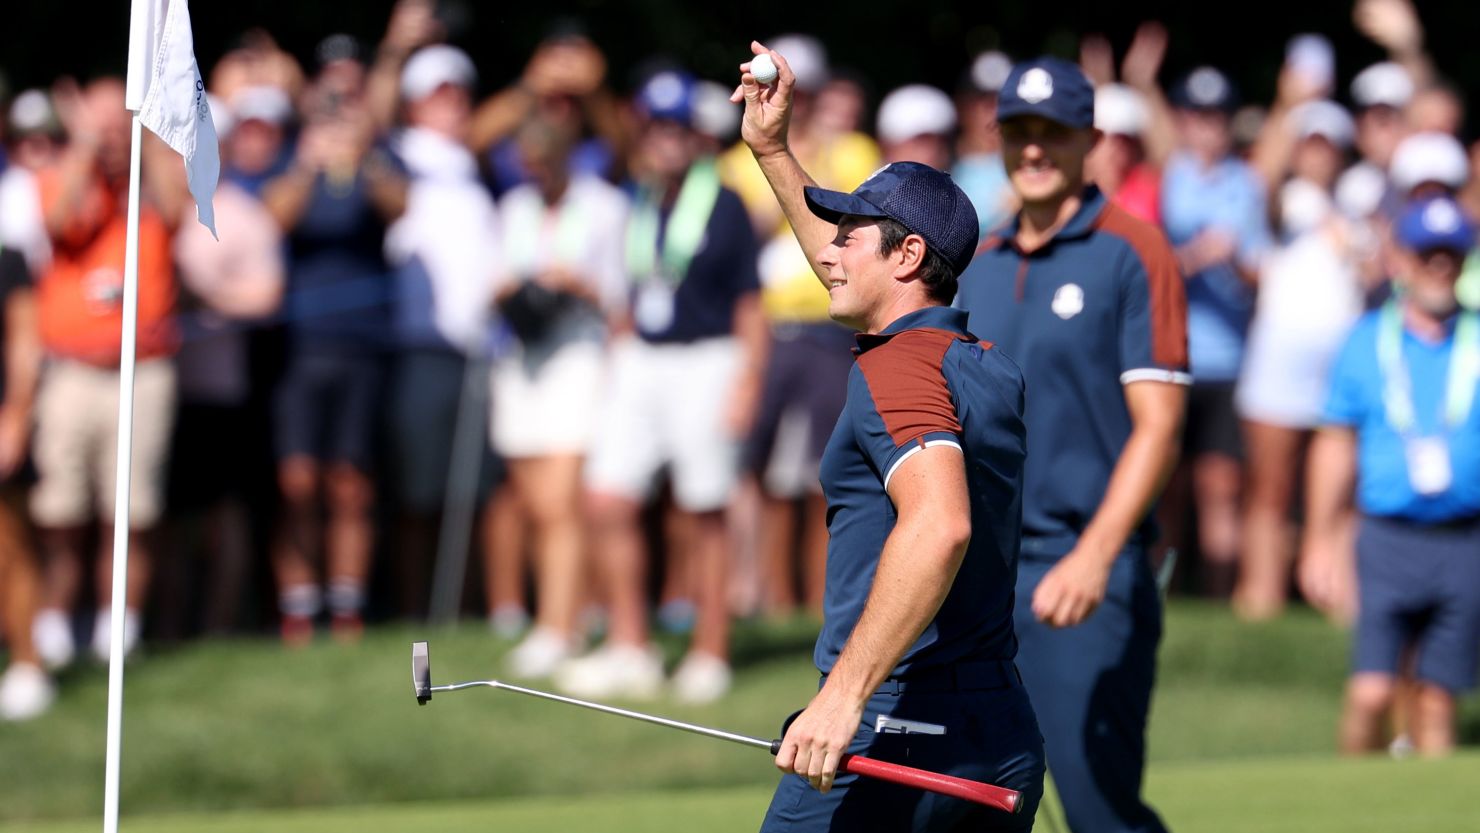 ROME, ITALY - SEPTEMBER 28: Viktor Hovland of Team Europe acknowledges the crowd following a hole-in-one on the fifth hole during a practice round prior to the 2023 Ryder Cup at Marco Simone Golf Club on September 28, 2023 in Rome, Italy. (Photo by Richard Heathcote/Getty Images)